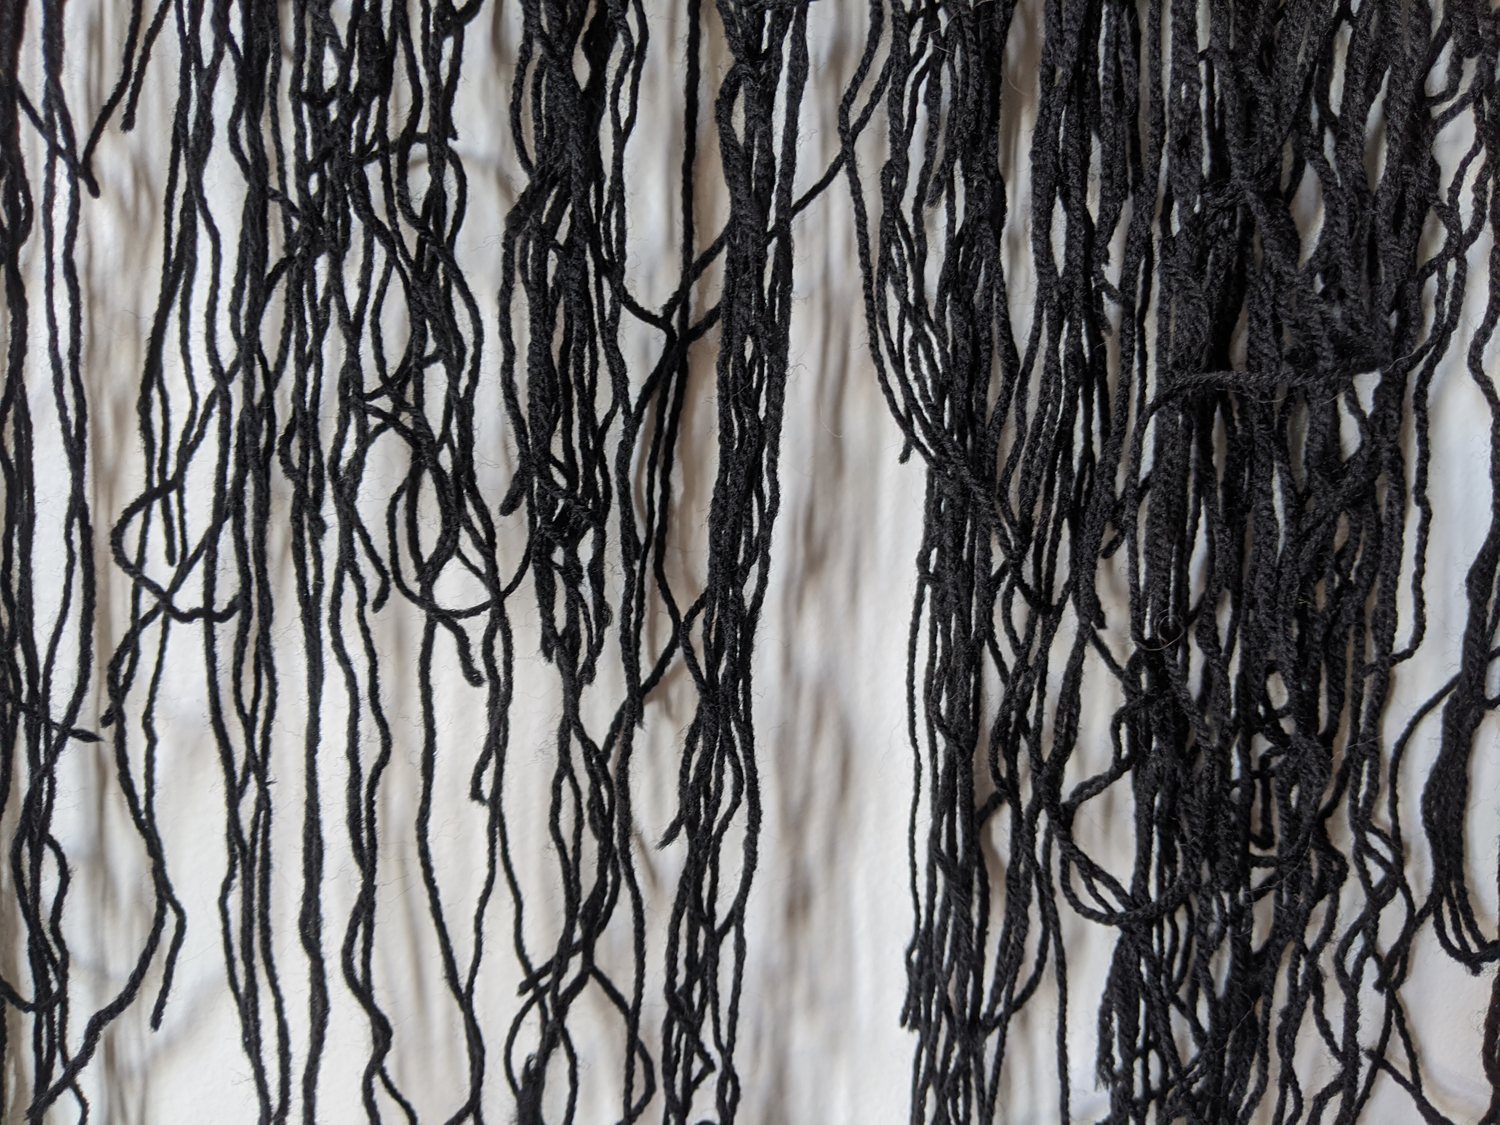 Close up/texture detail of black yarn threads hanging from coat hanger